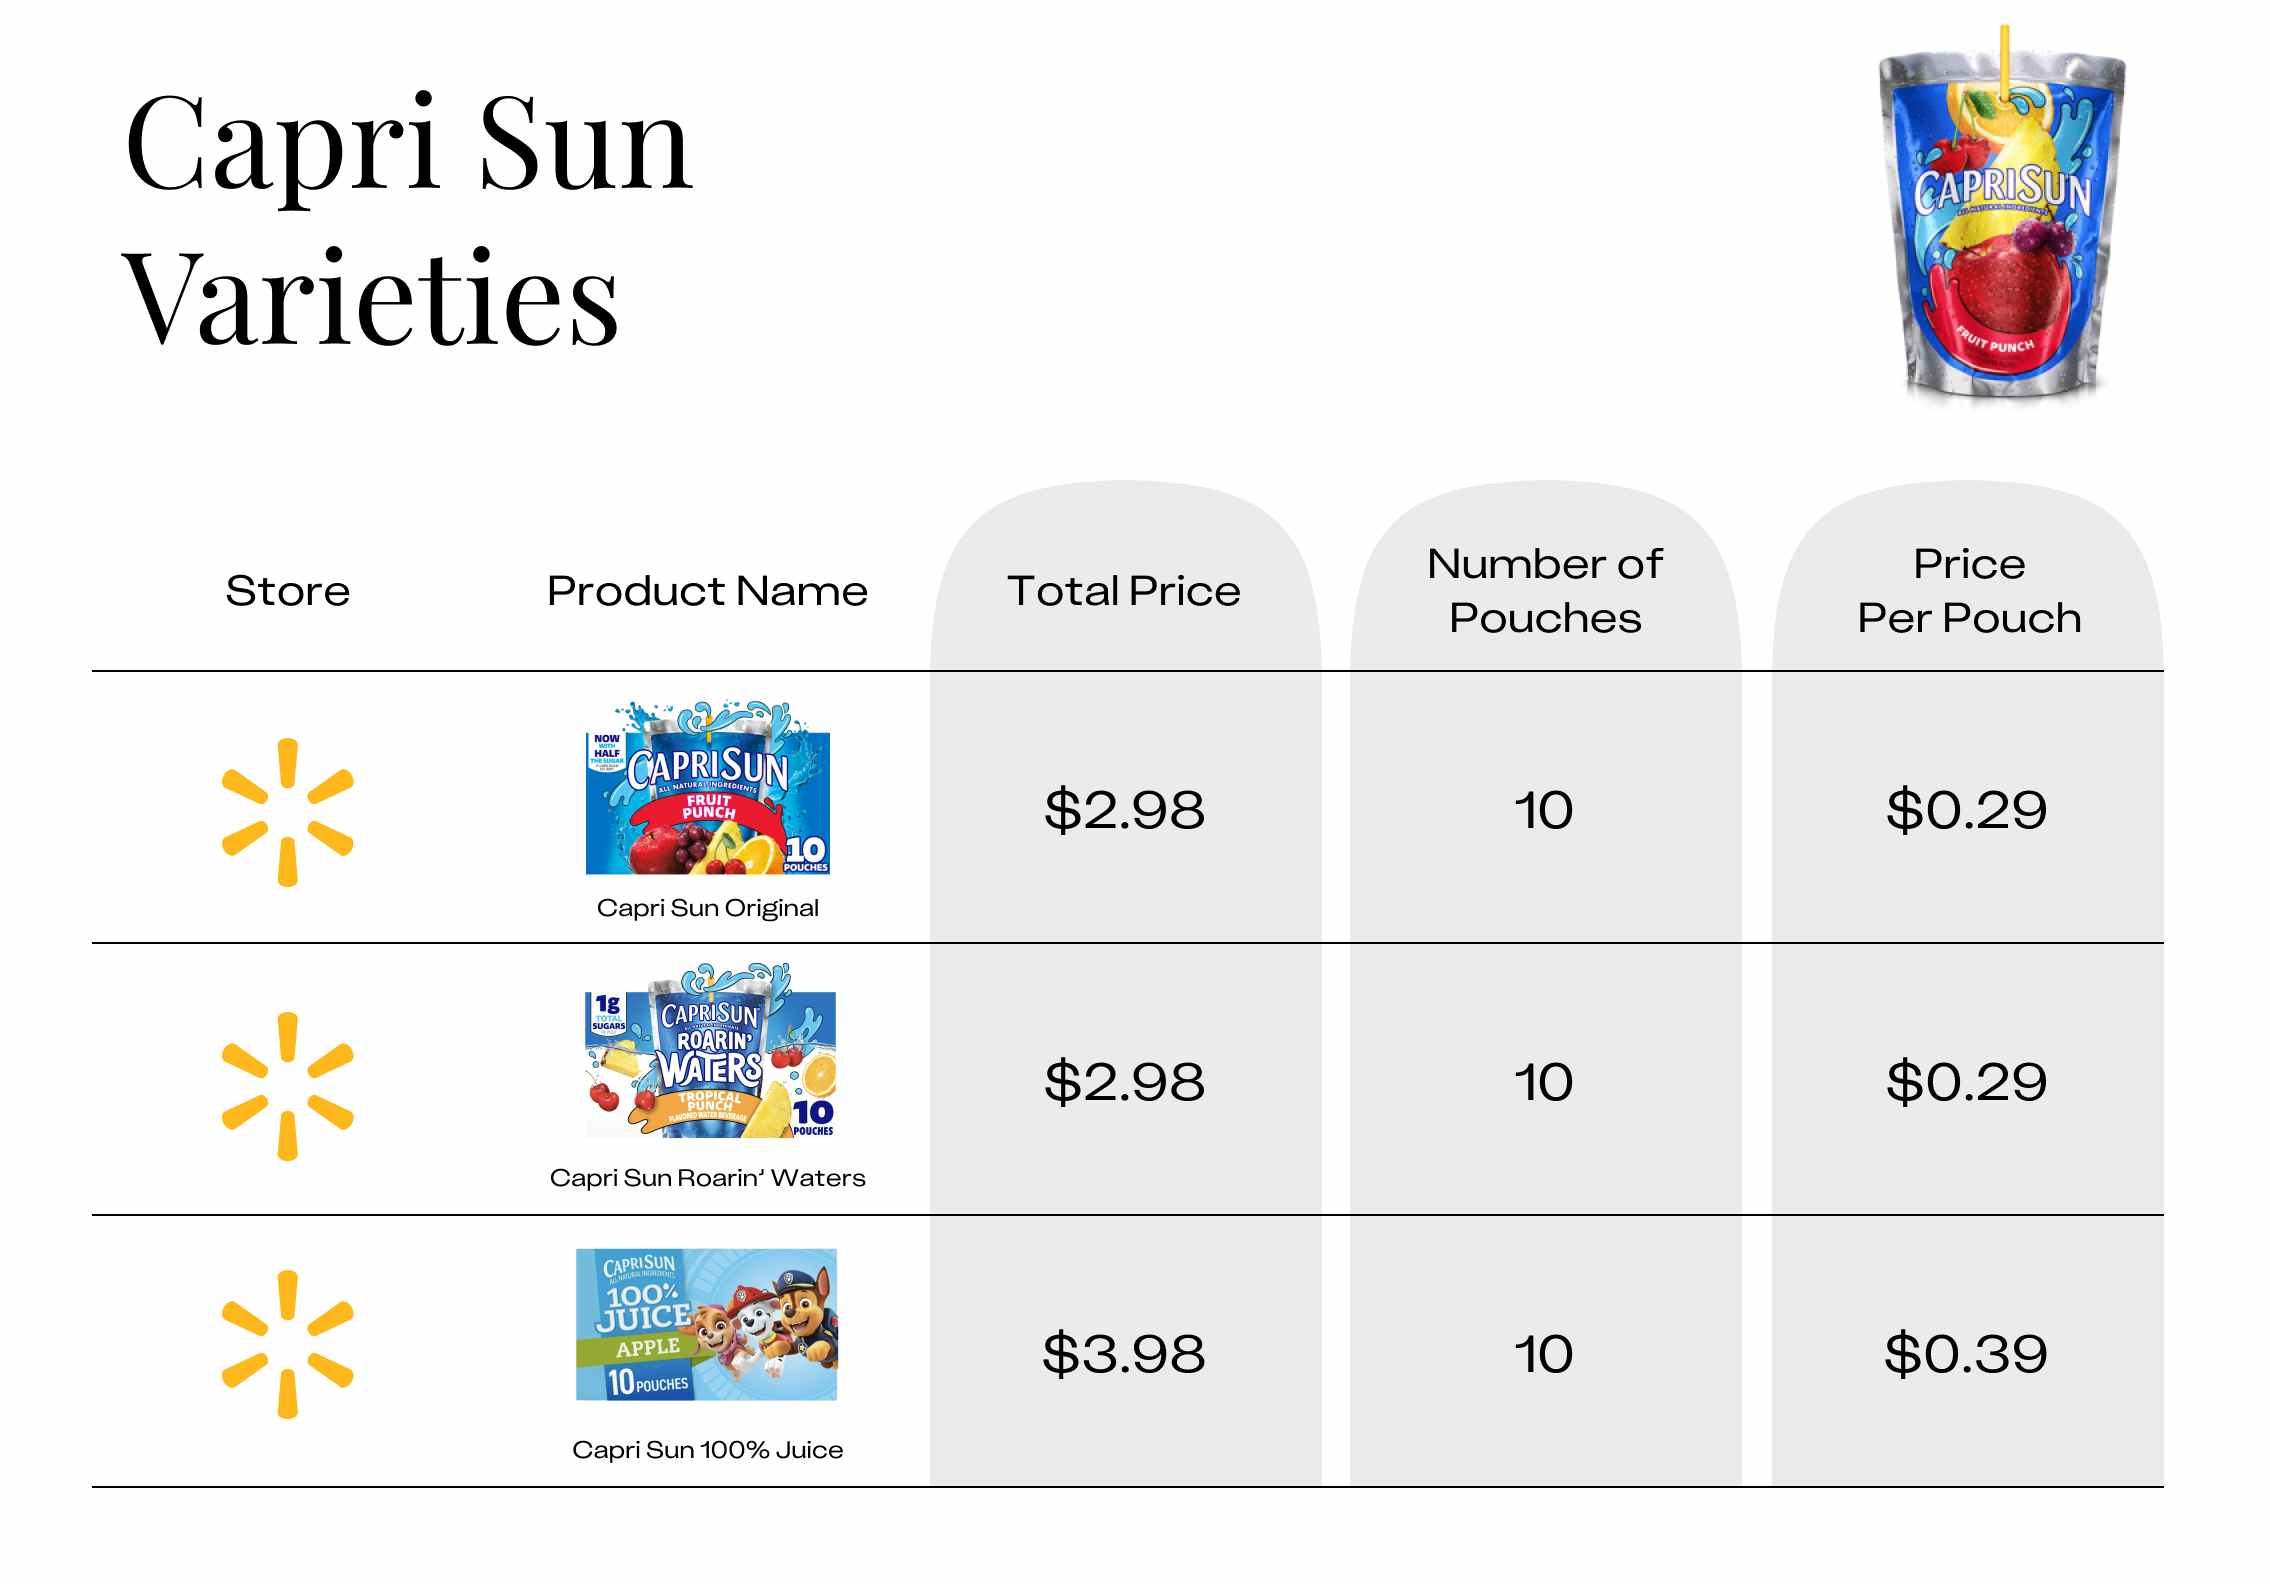 Chart showing pricing between different types of Capri Sun products